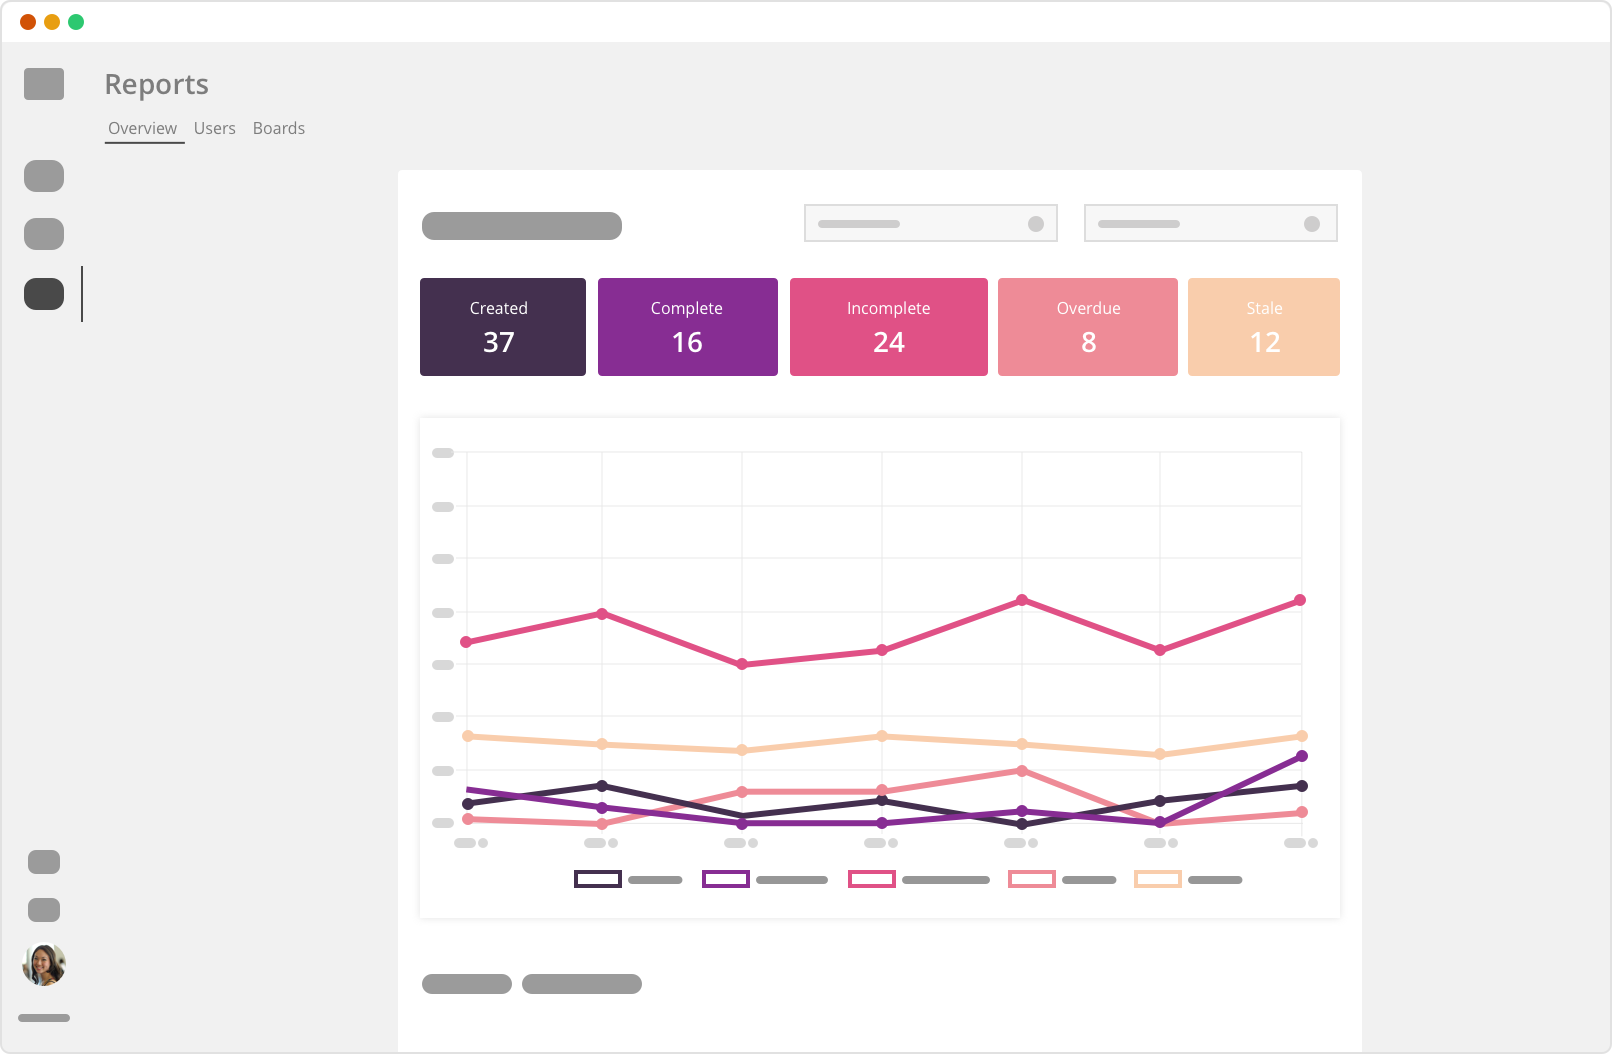 Rindle Software - Overview reports feed back project task progress with a graph for visualizing team performance and the top five active users etc